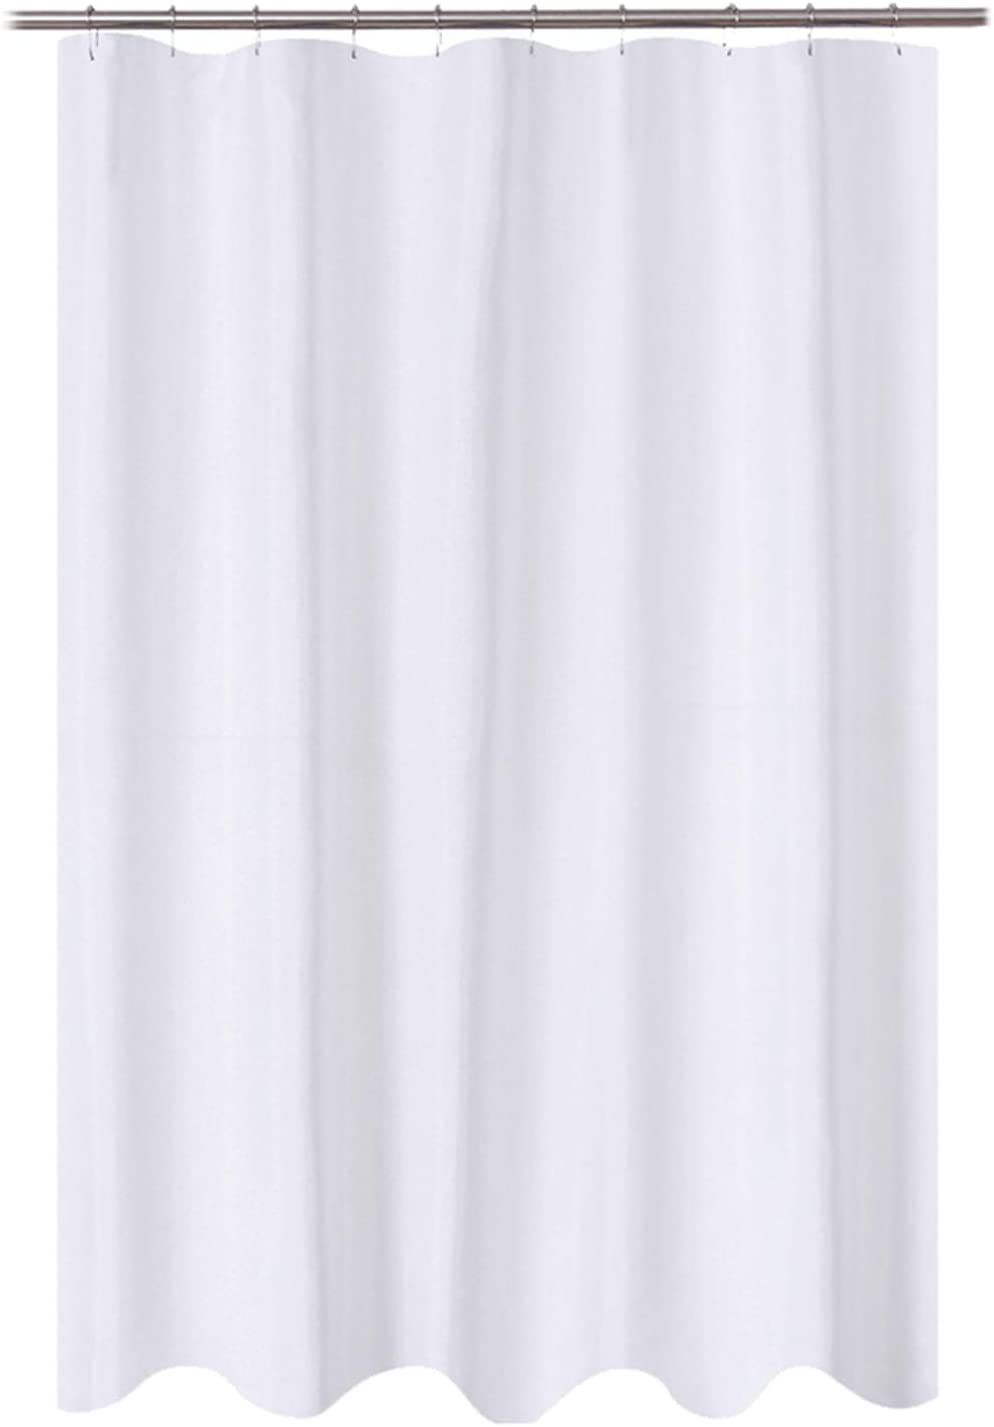 N&Y HOME Fabric Shower Stall Curtain or Liner Hotel Quality, Machine Washable, Water Repellent